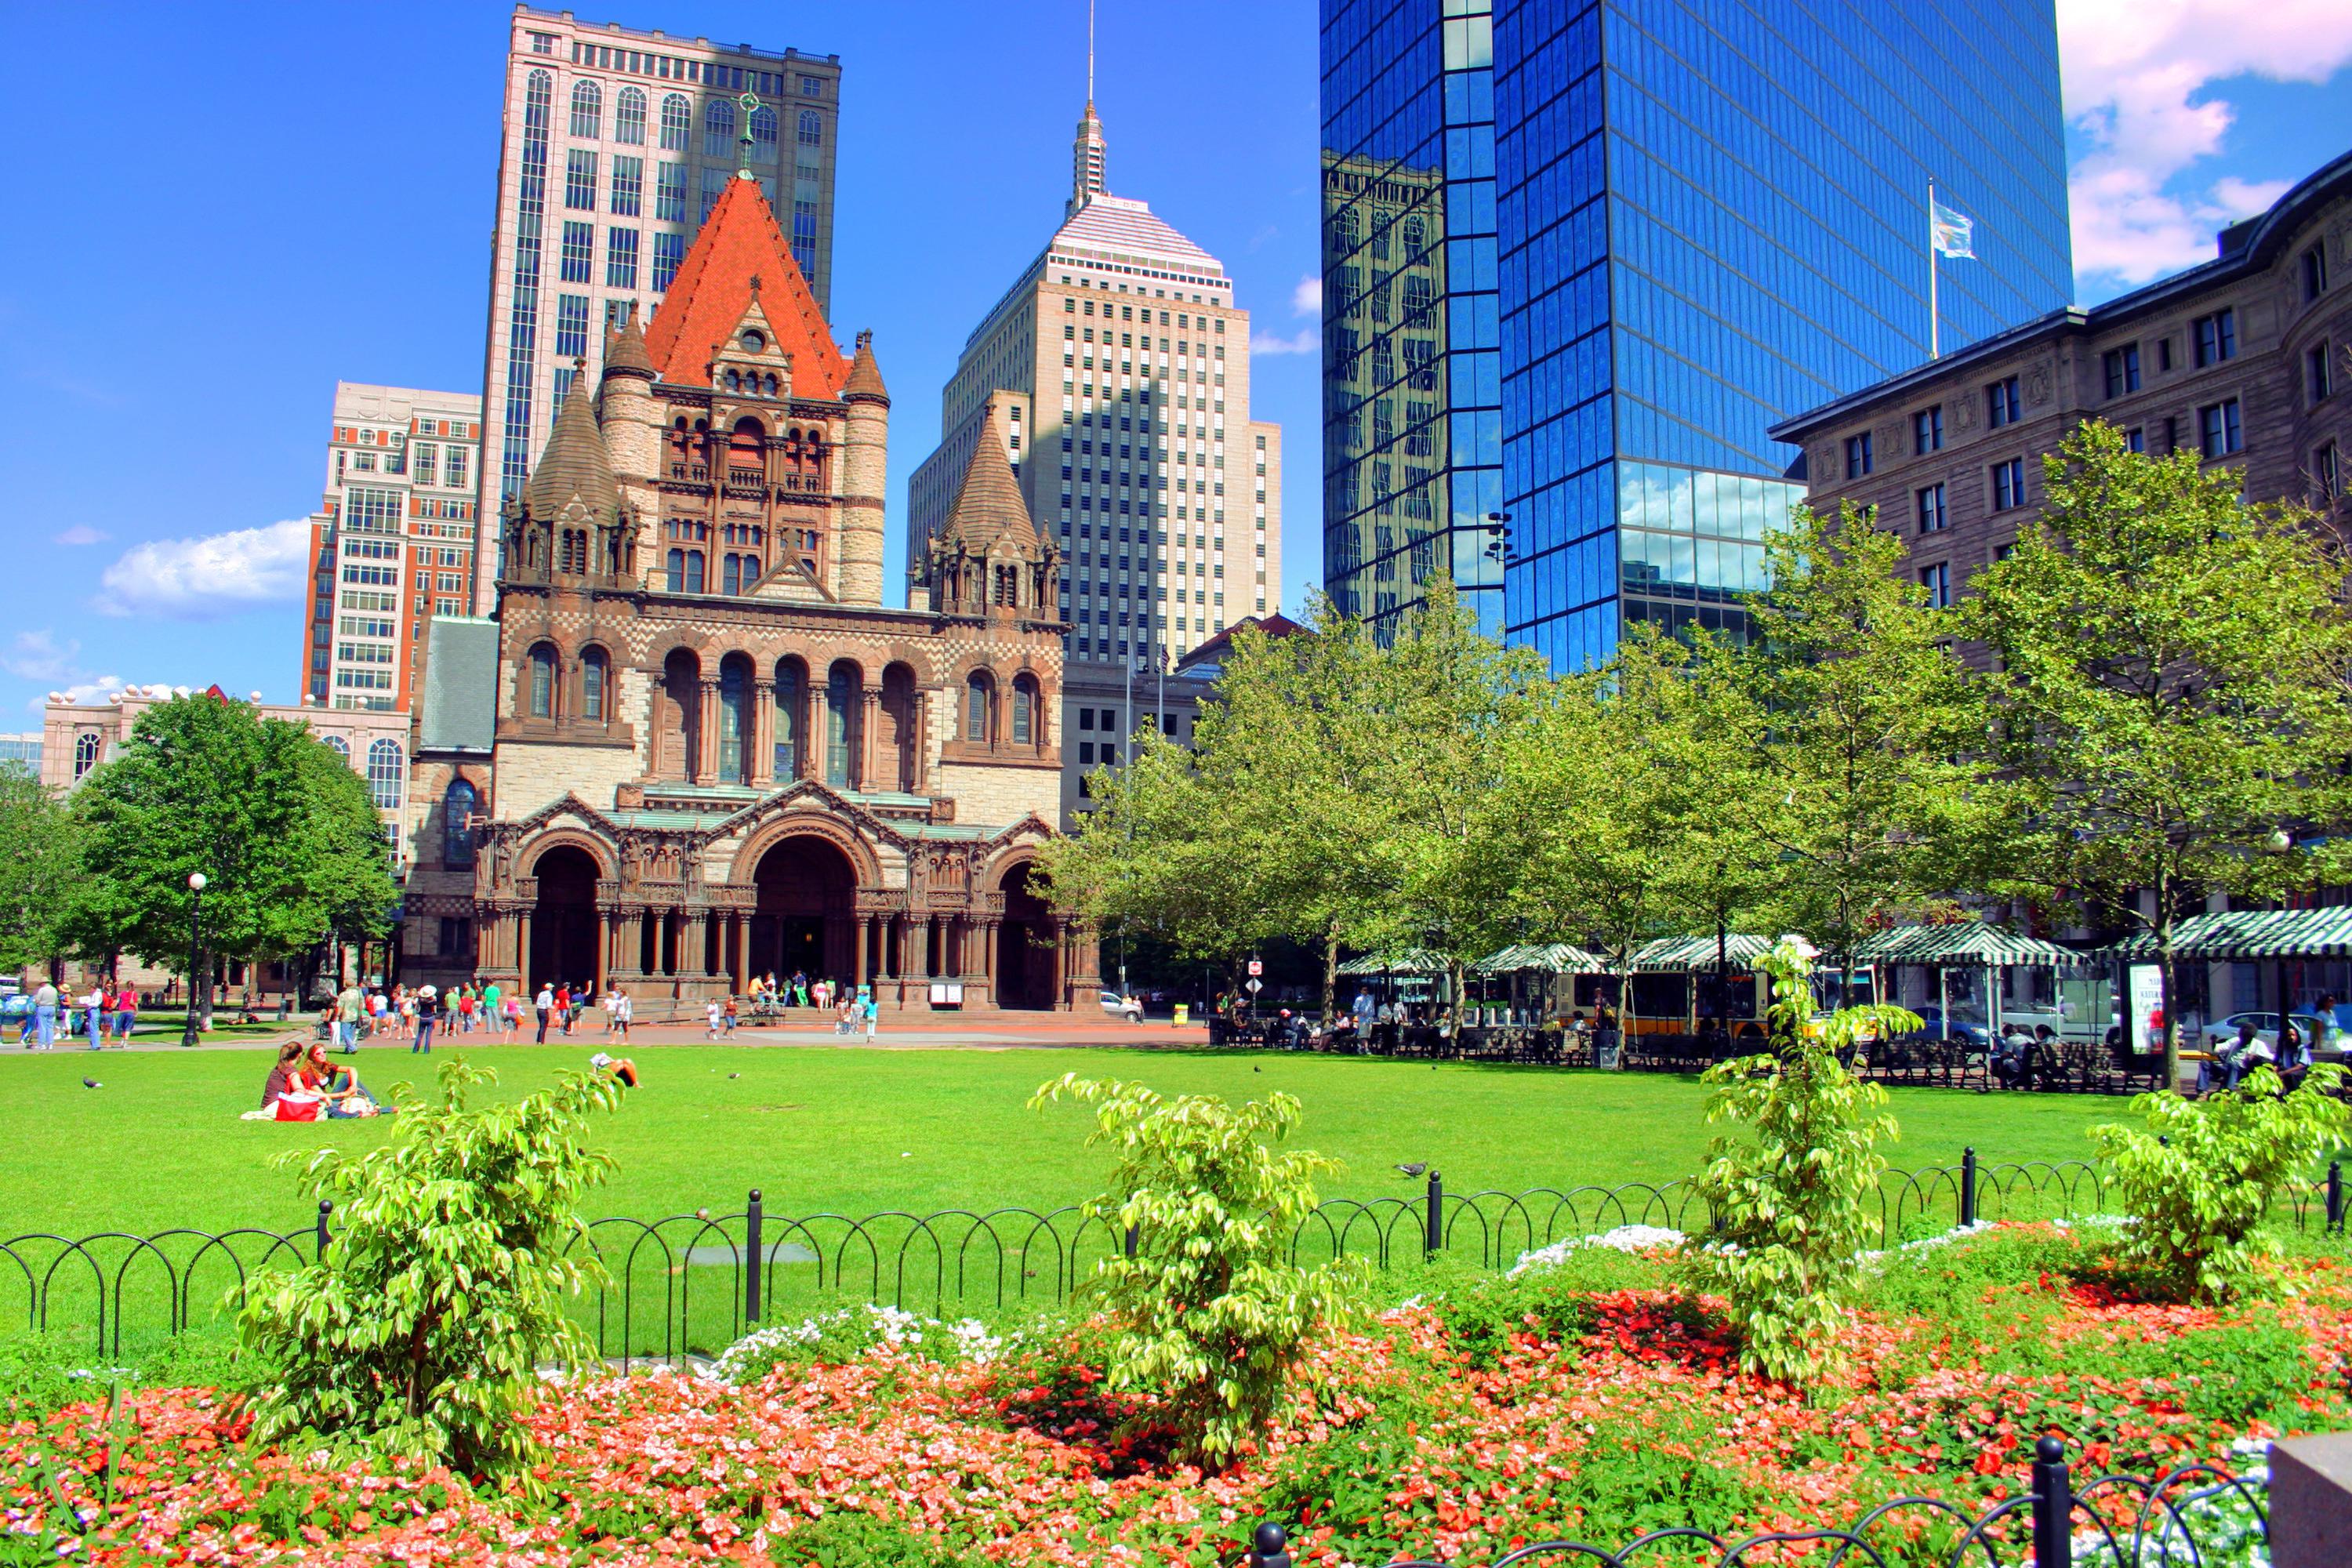 Copley Square Boston History, Facts, & Things To Do Nearby